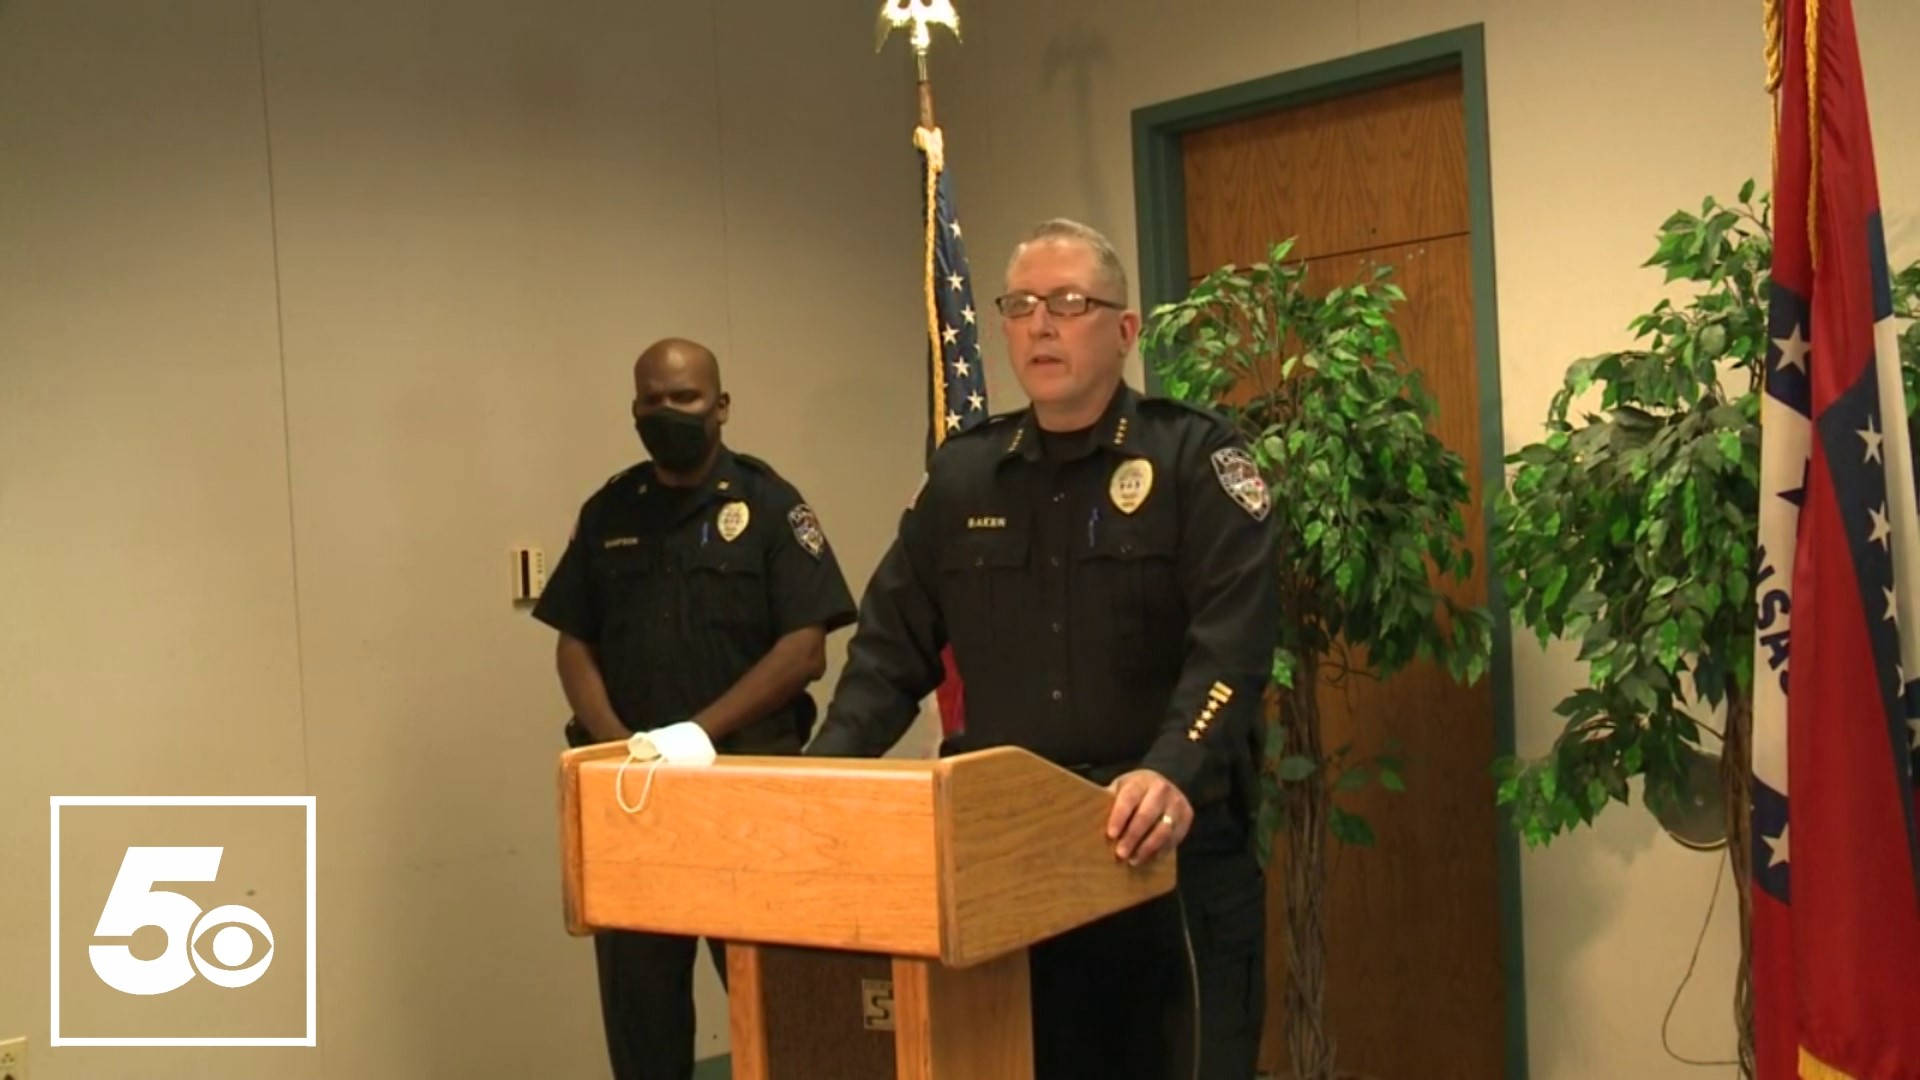 Fort Smith Police Department provides an update on the officer injured in a knife attack and what's known about the 3 people killed.